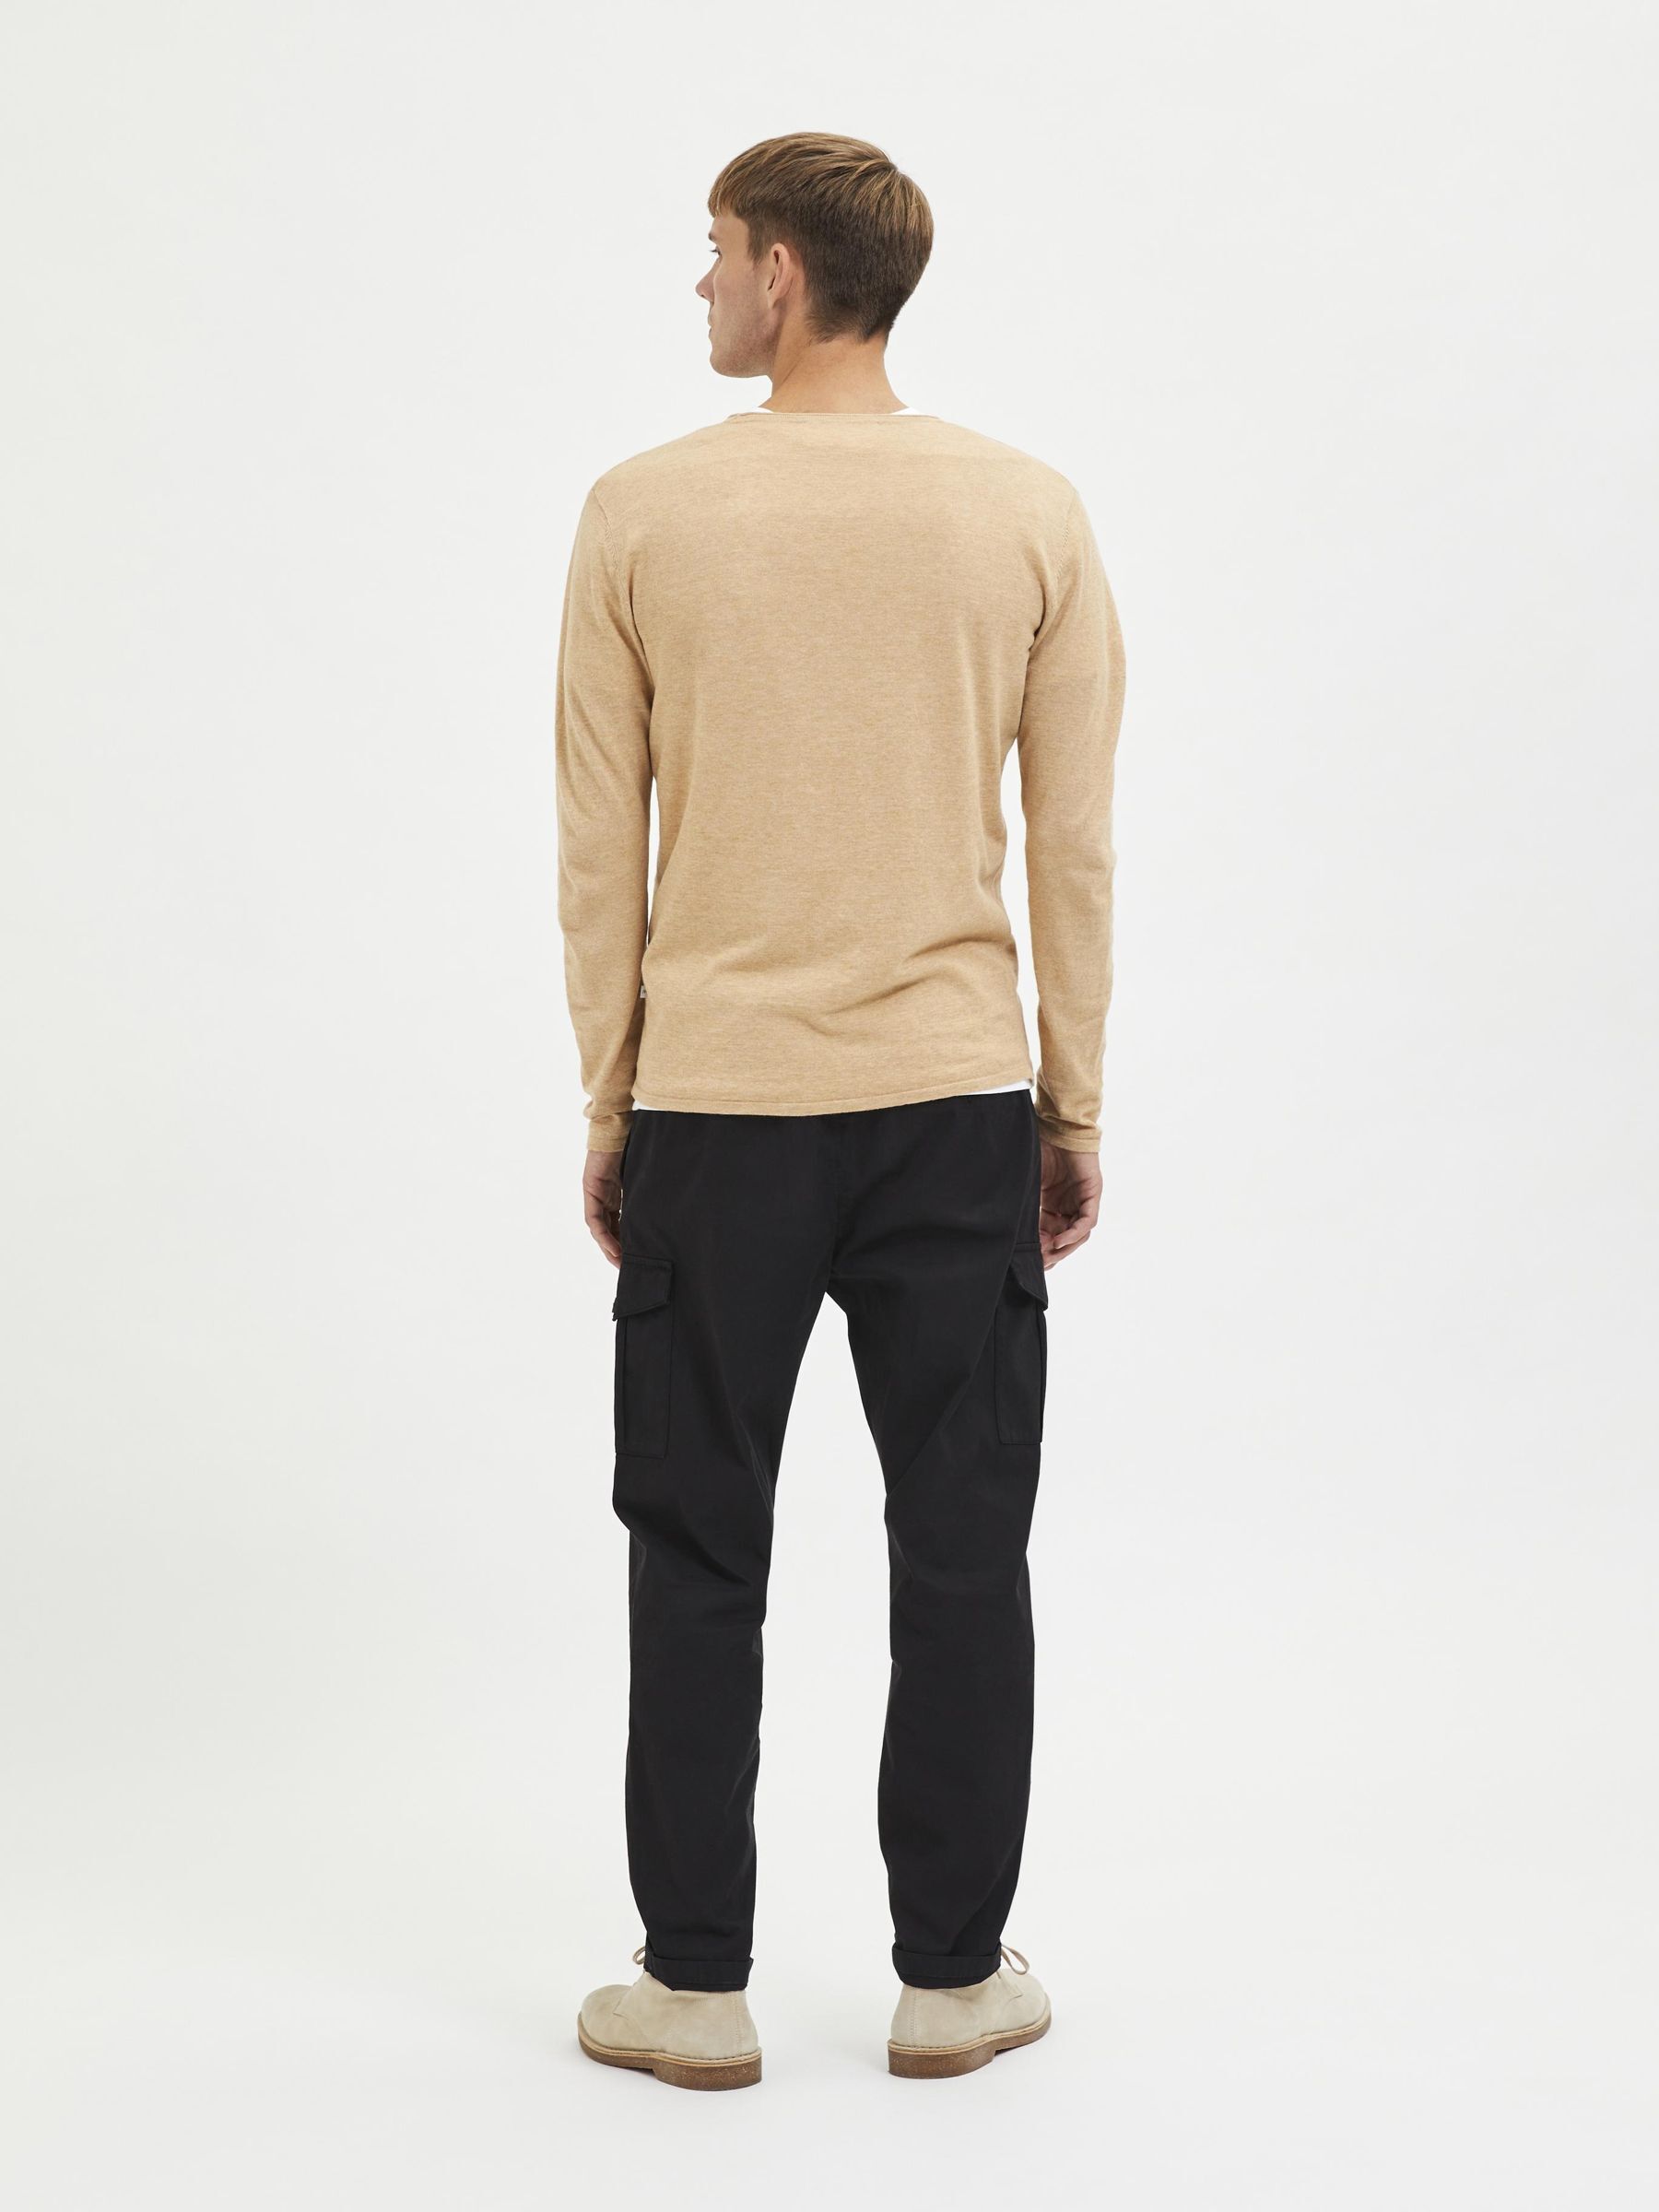 Selected SLHROME LS KNIT CREW NECK B NOOS bruin/beige-3 3